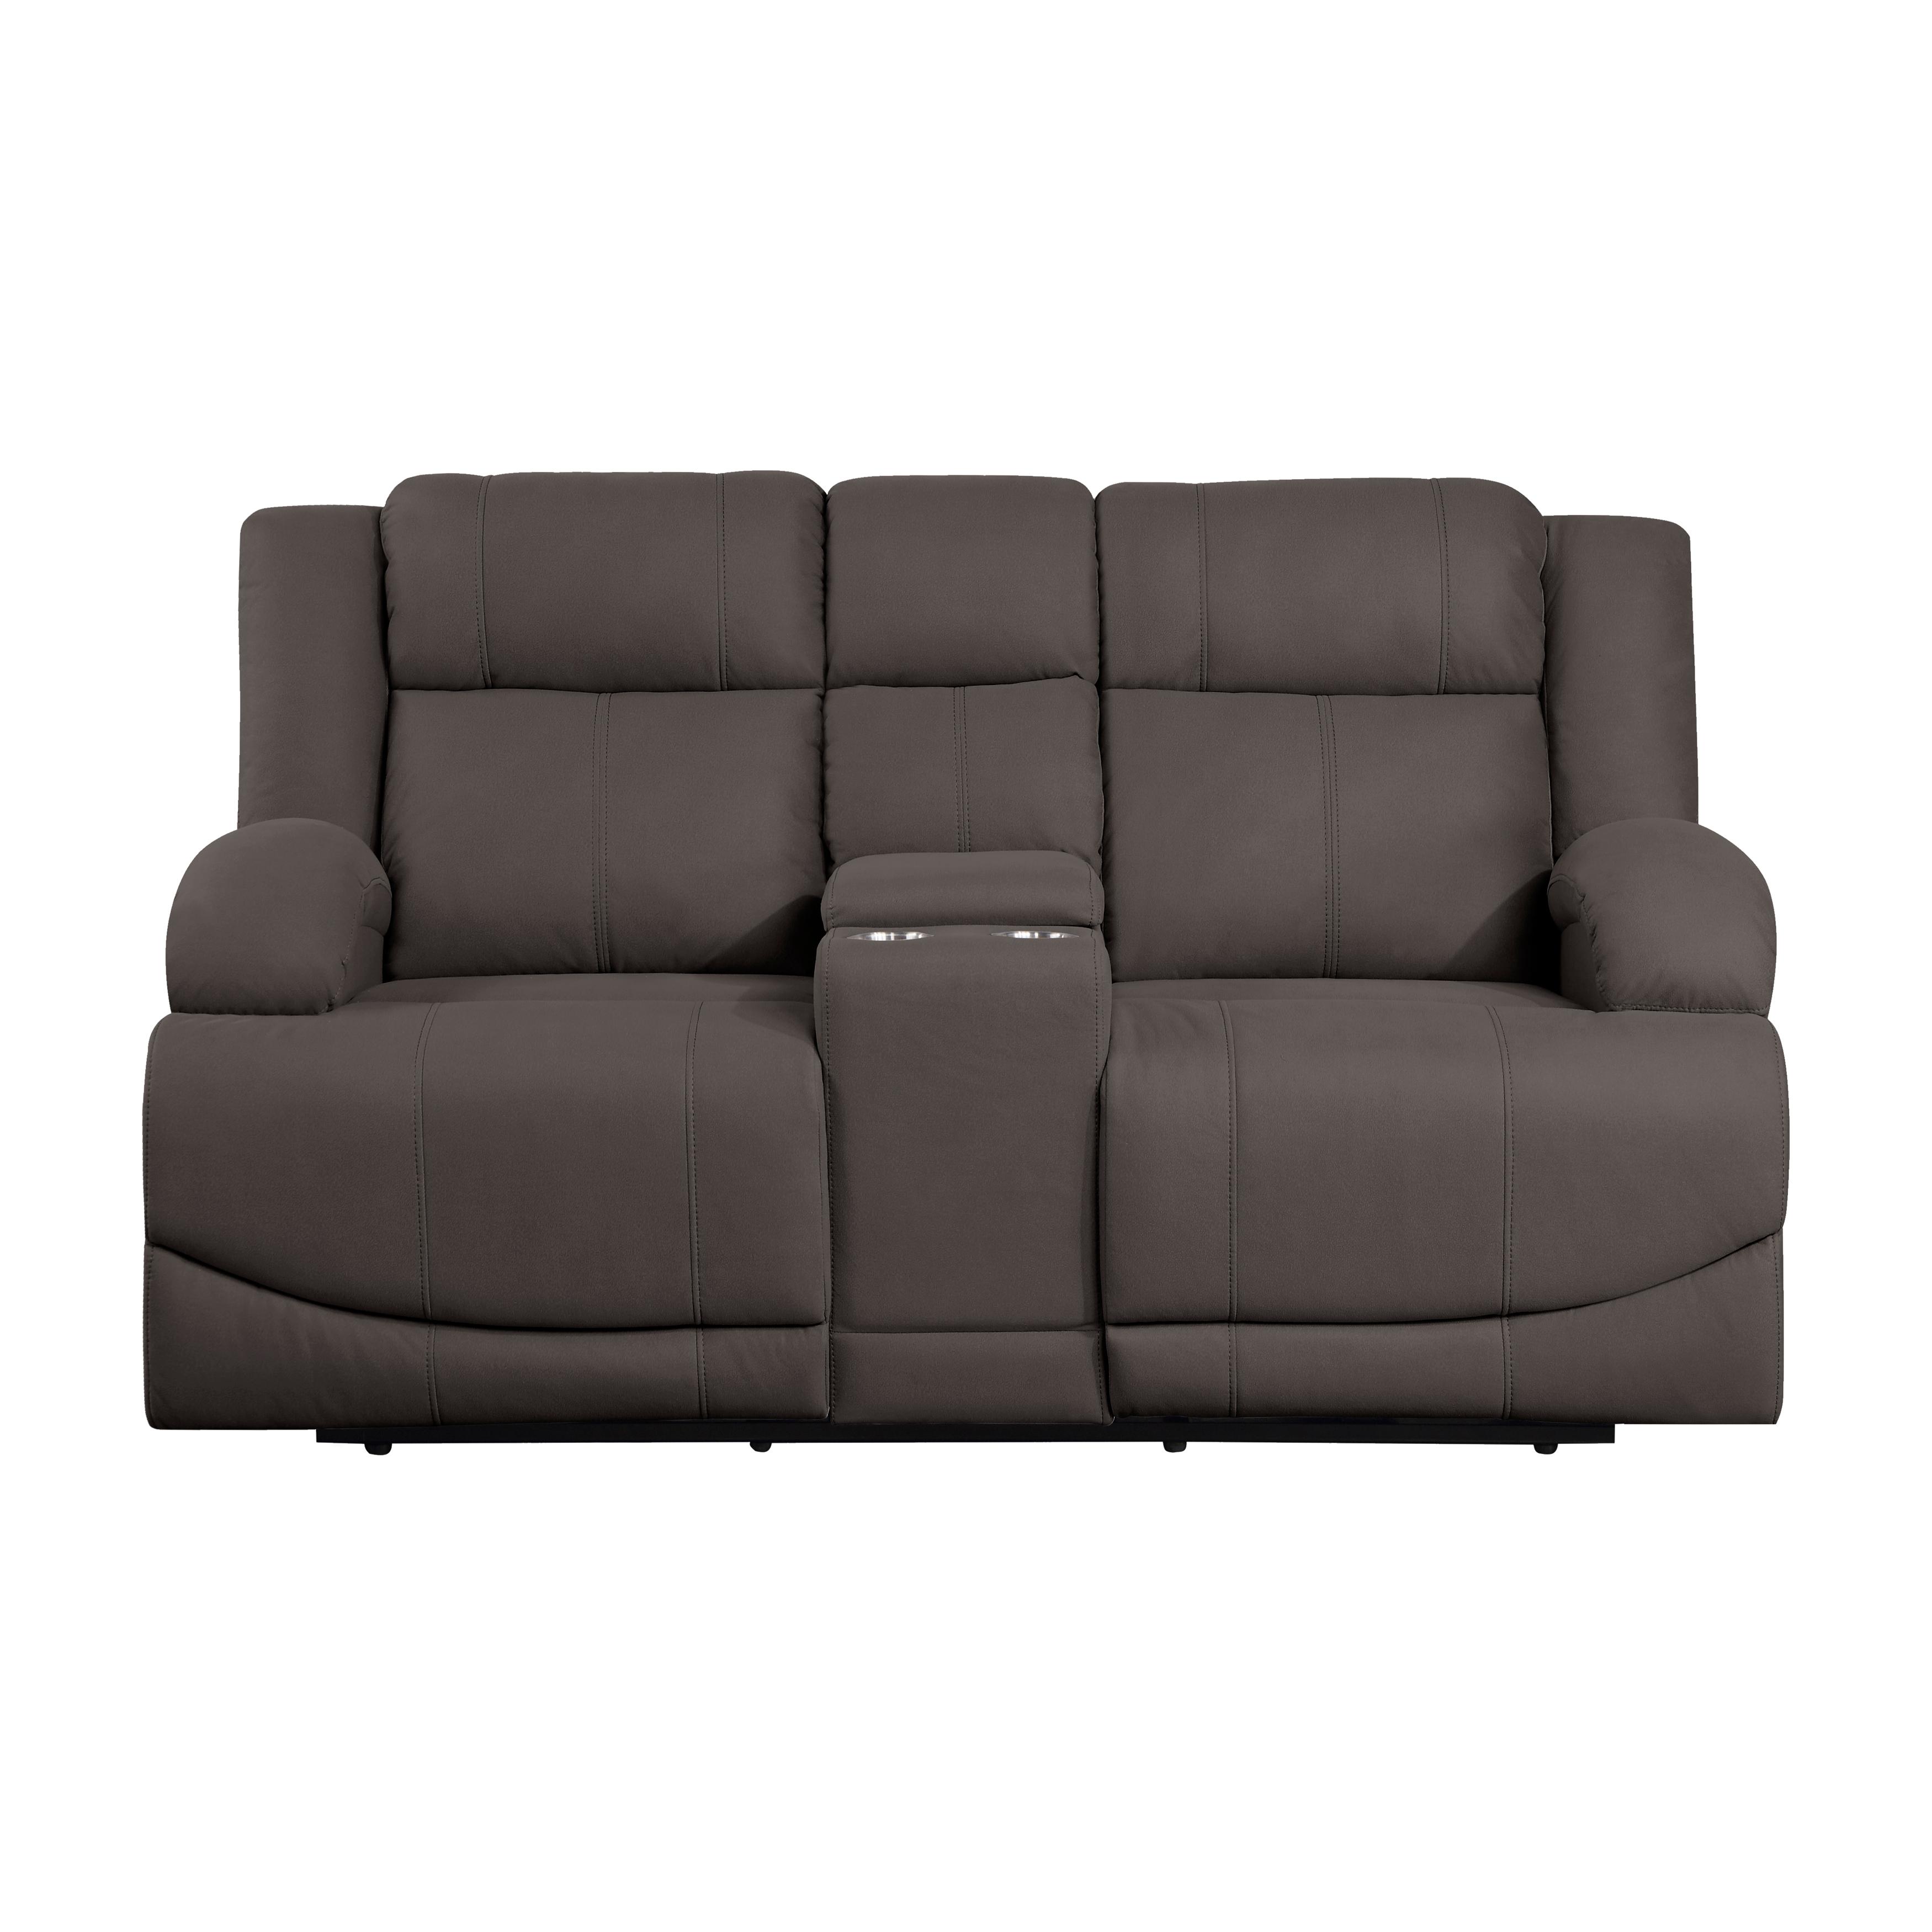 Transitional Power Reclining Loveseat 9207CHC-2PW Camryn 9207CHC-2PW in Chocolate Microfiber